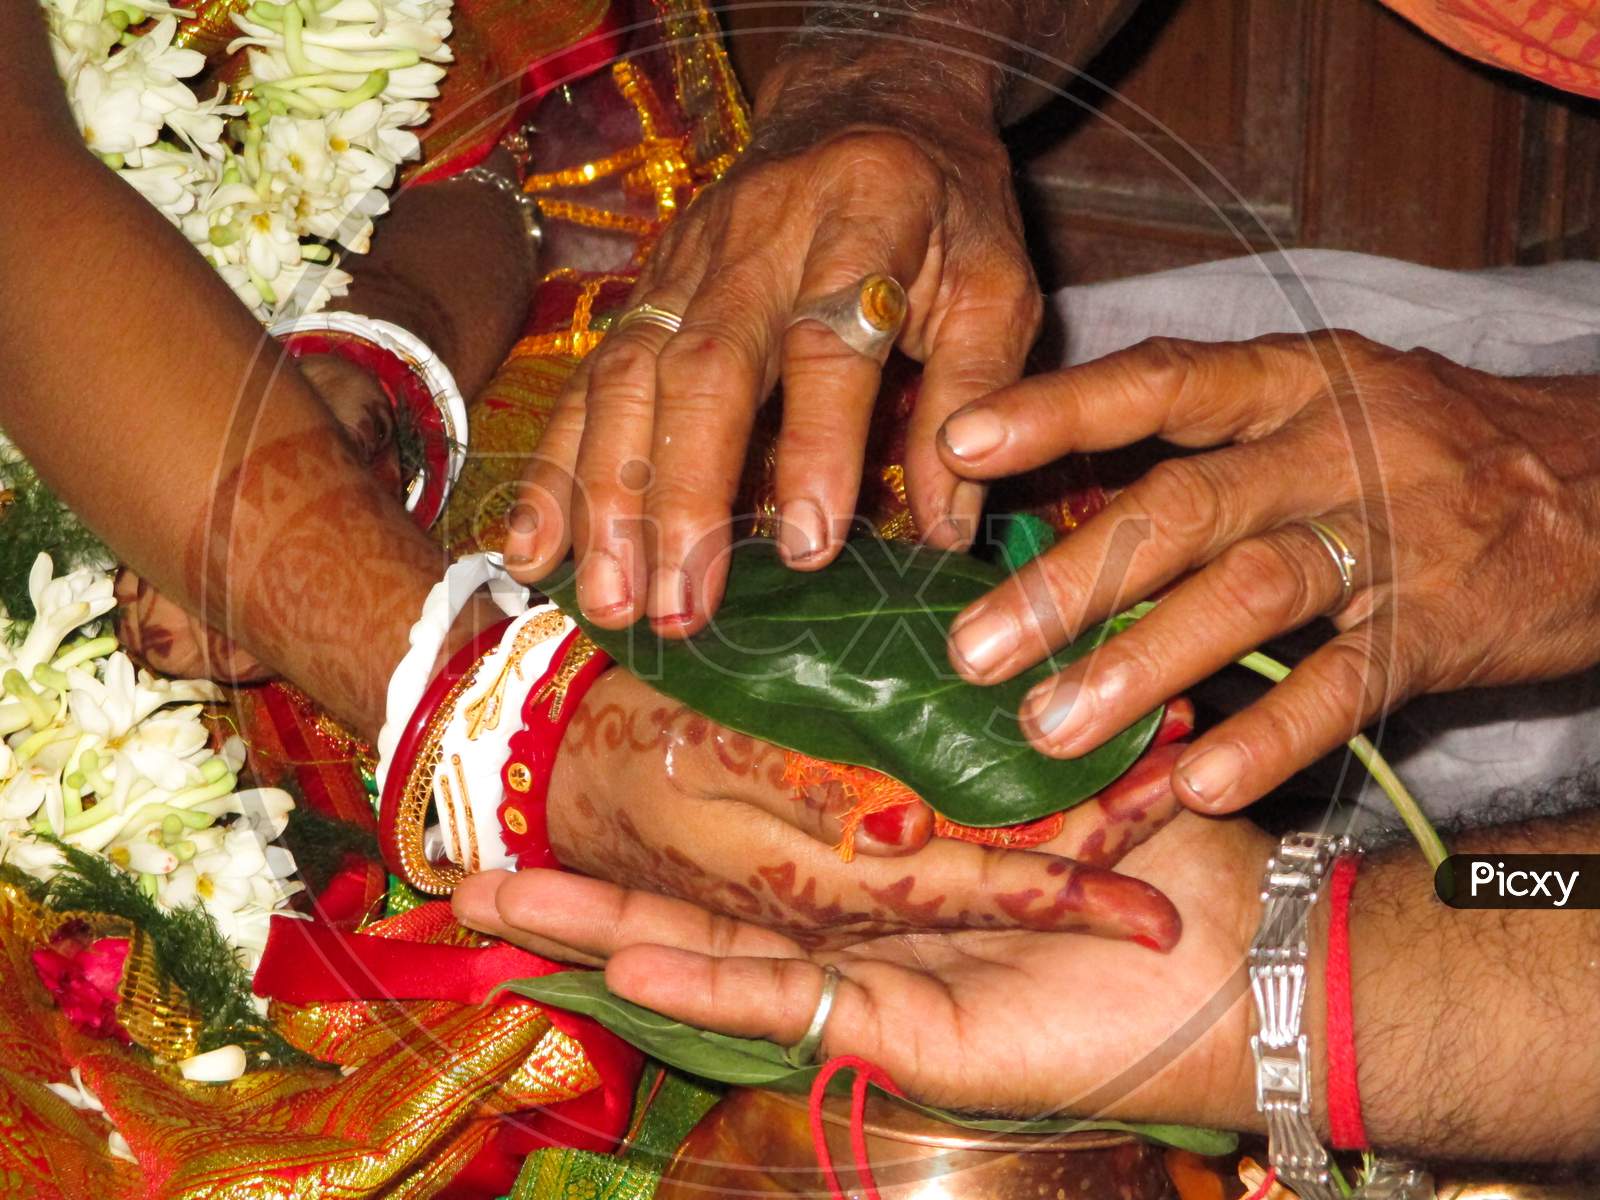 Indian Wedding Ceremony : Wedding Is An Important Part Of Our Life And Also In Indian Hindu Culture . There Are Two Hands Of A Man And A Woman Who Loves Each Other And Going To Marry .